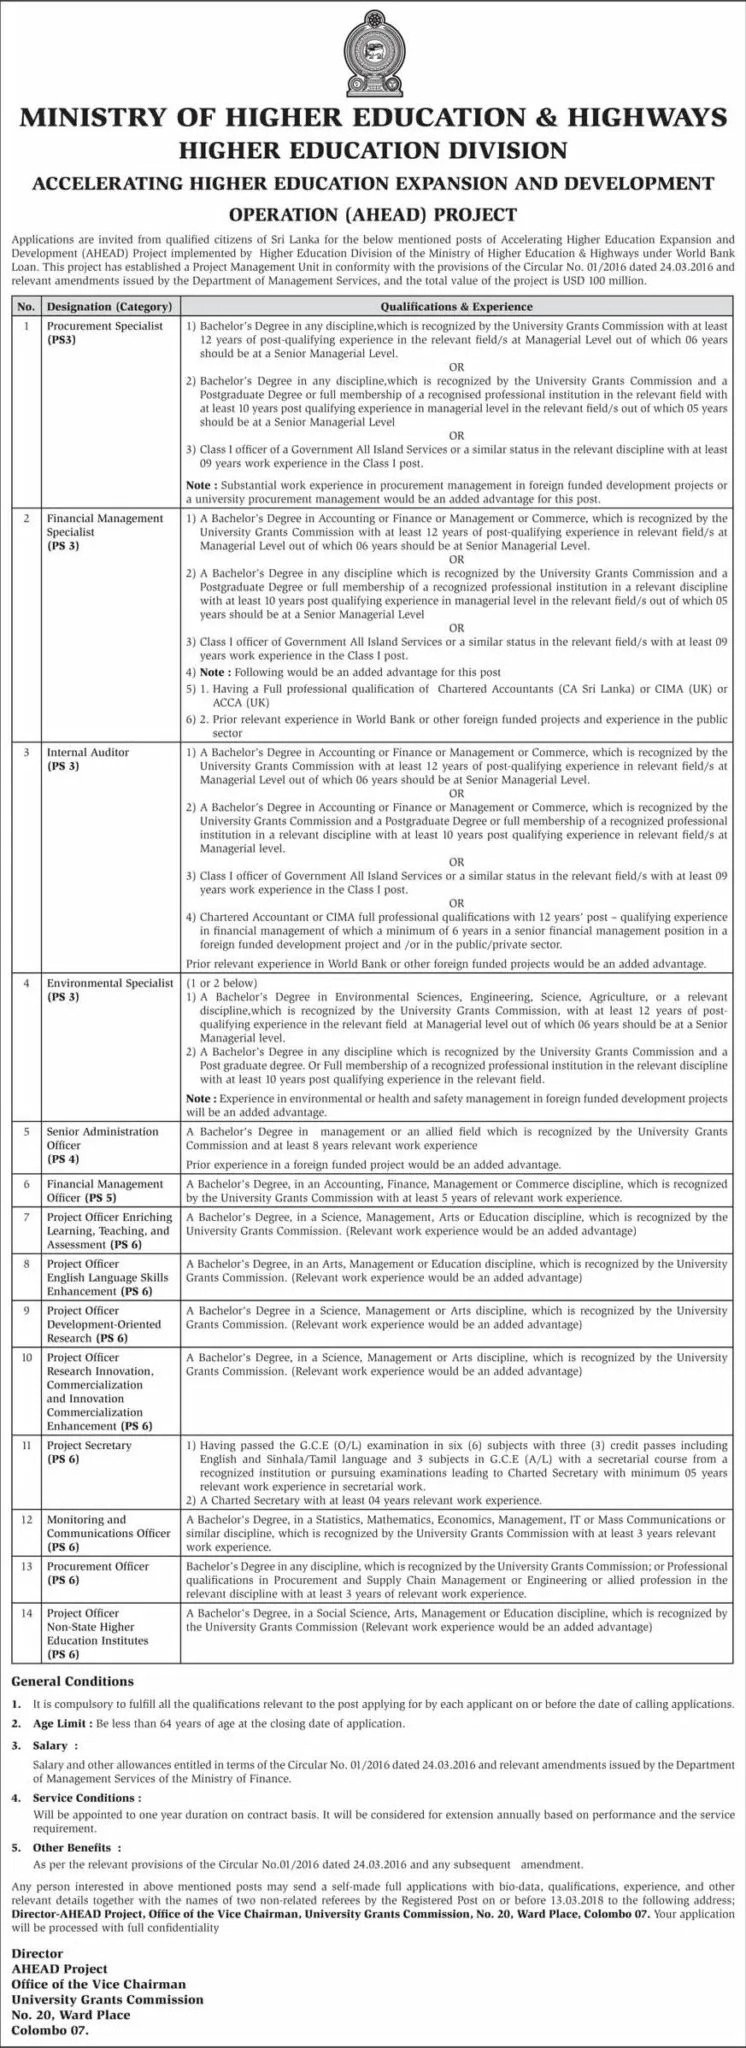 Ministry of Higher Education Vacancies 2018